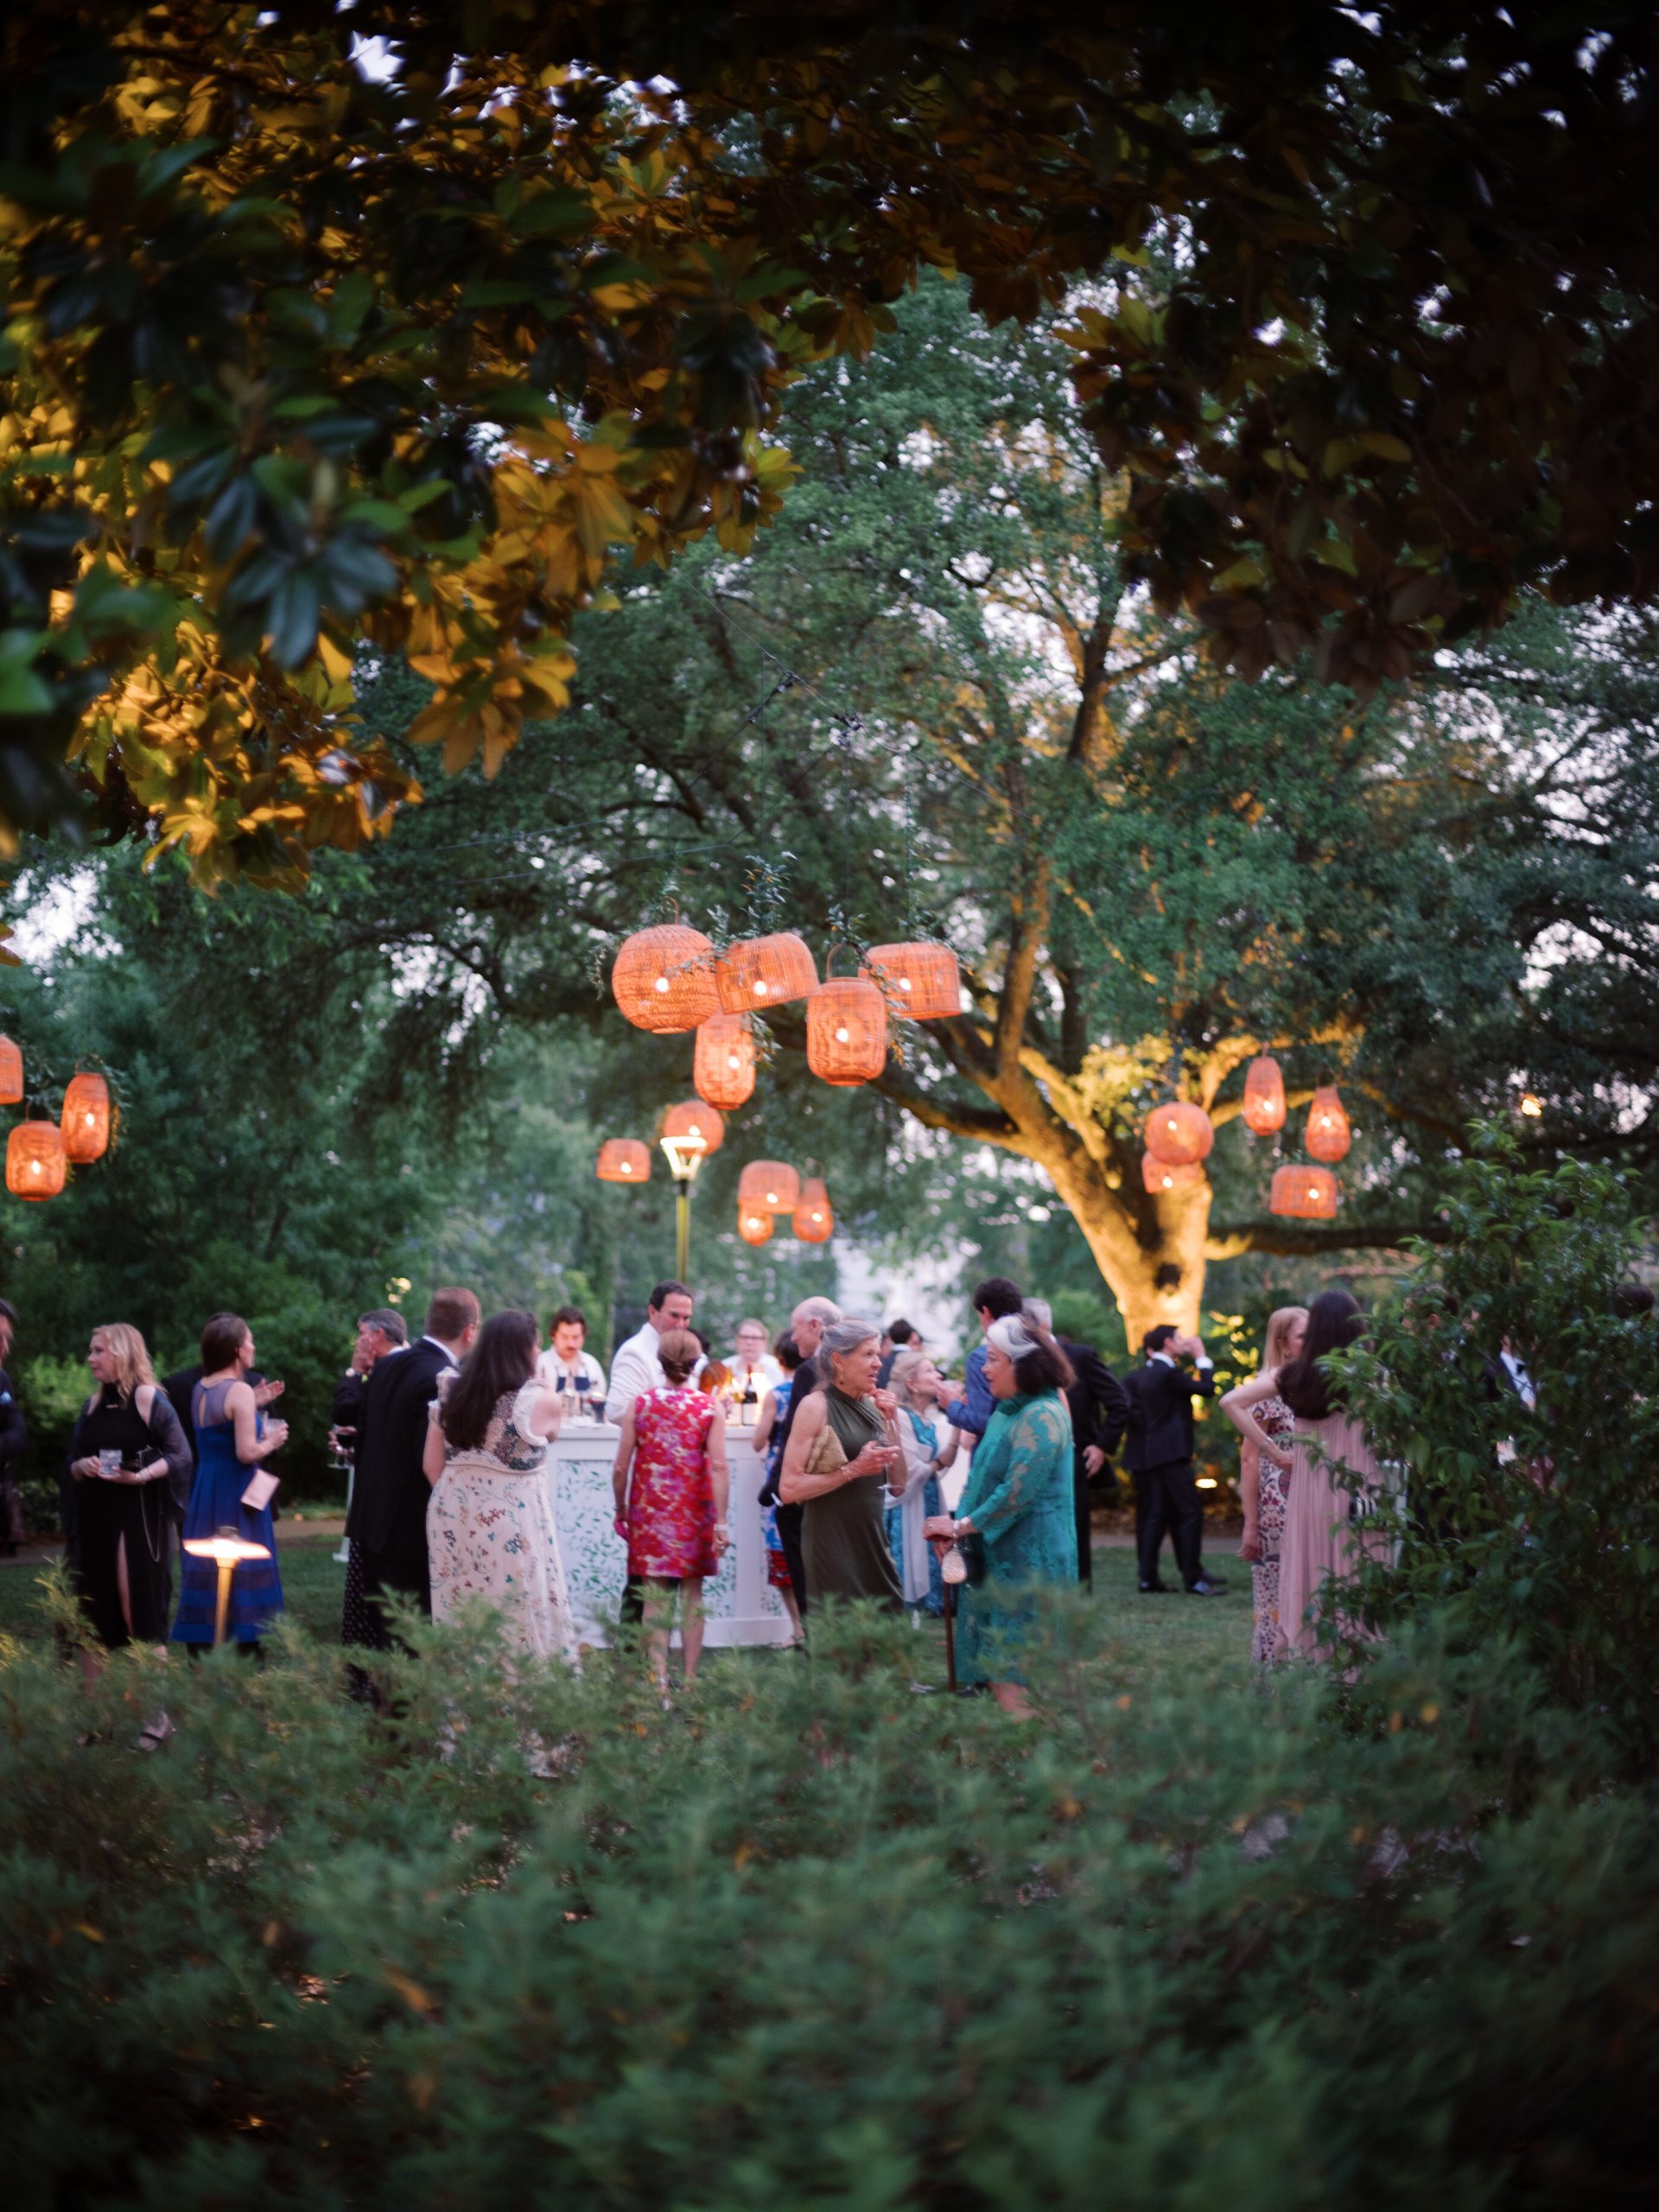 A sublime reception at the Hampton-Preston Mansion and Gardens followed the ceremony, with dancing, toasting, and fellowship.